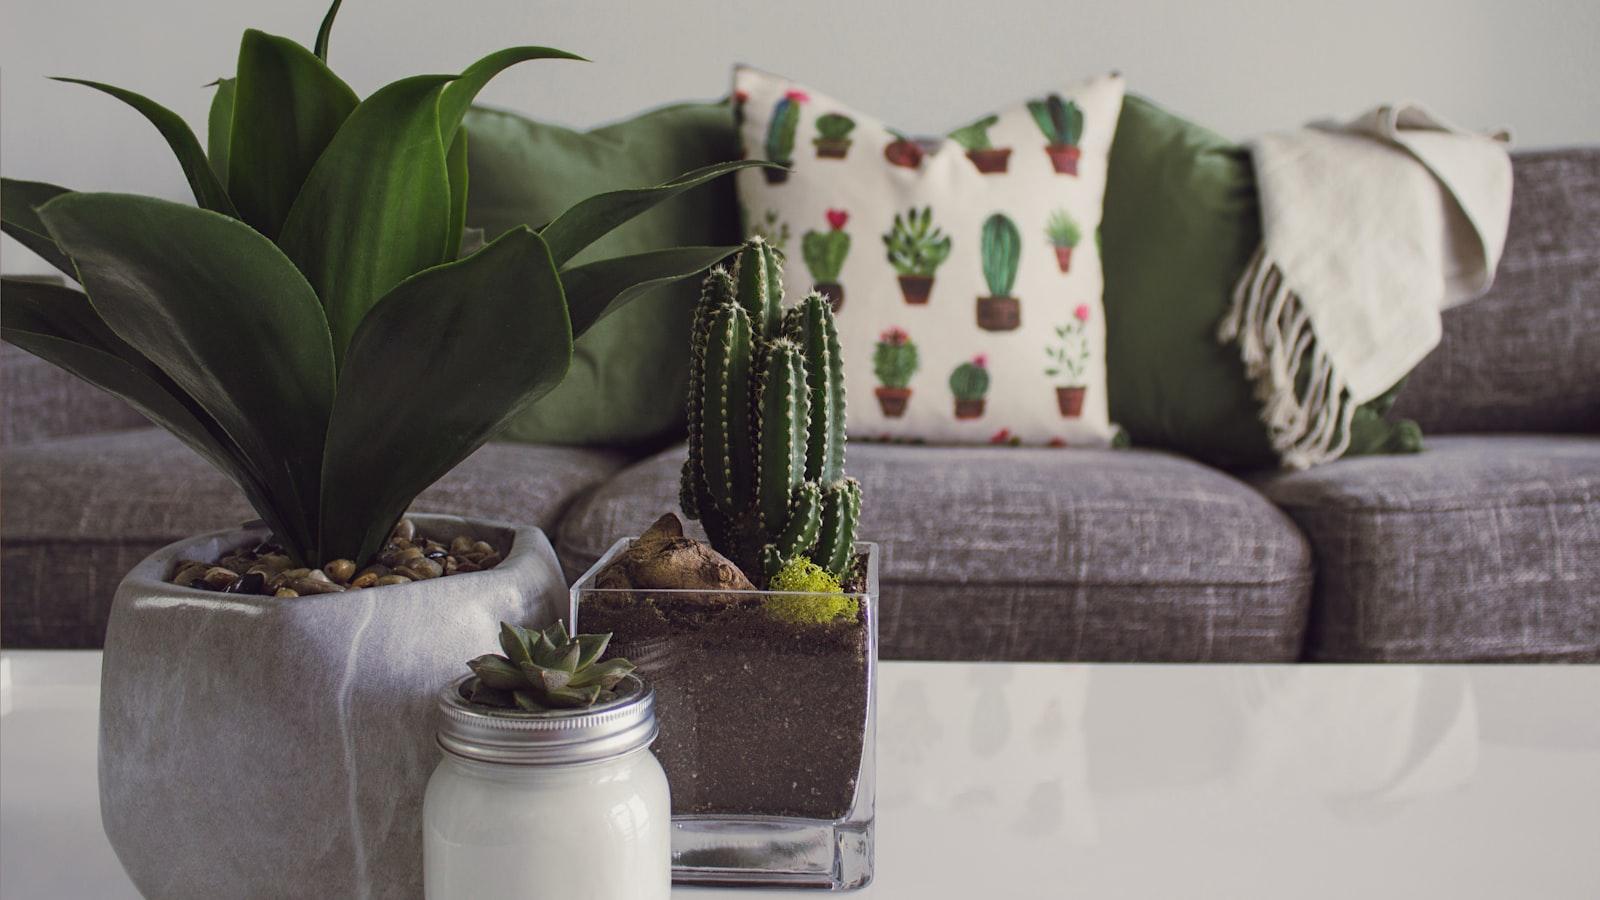 “Plant Parenthood: DIY Planters and Displays for Indoor Greenery”